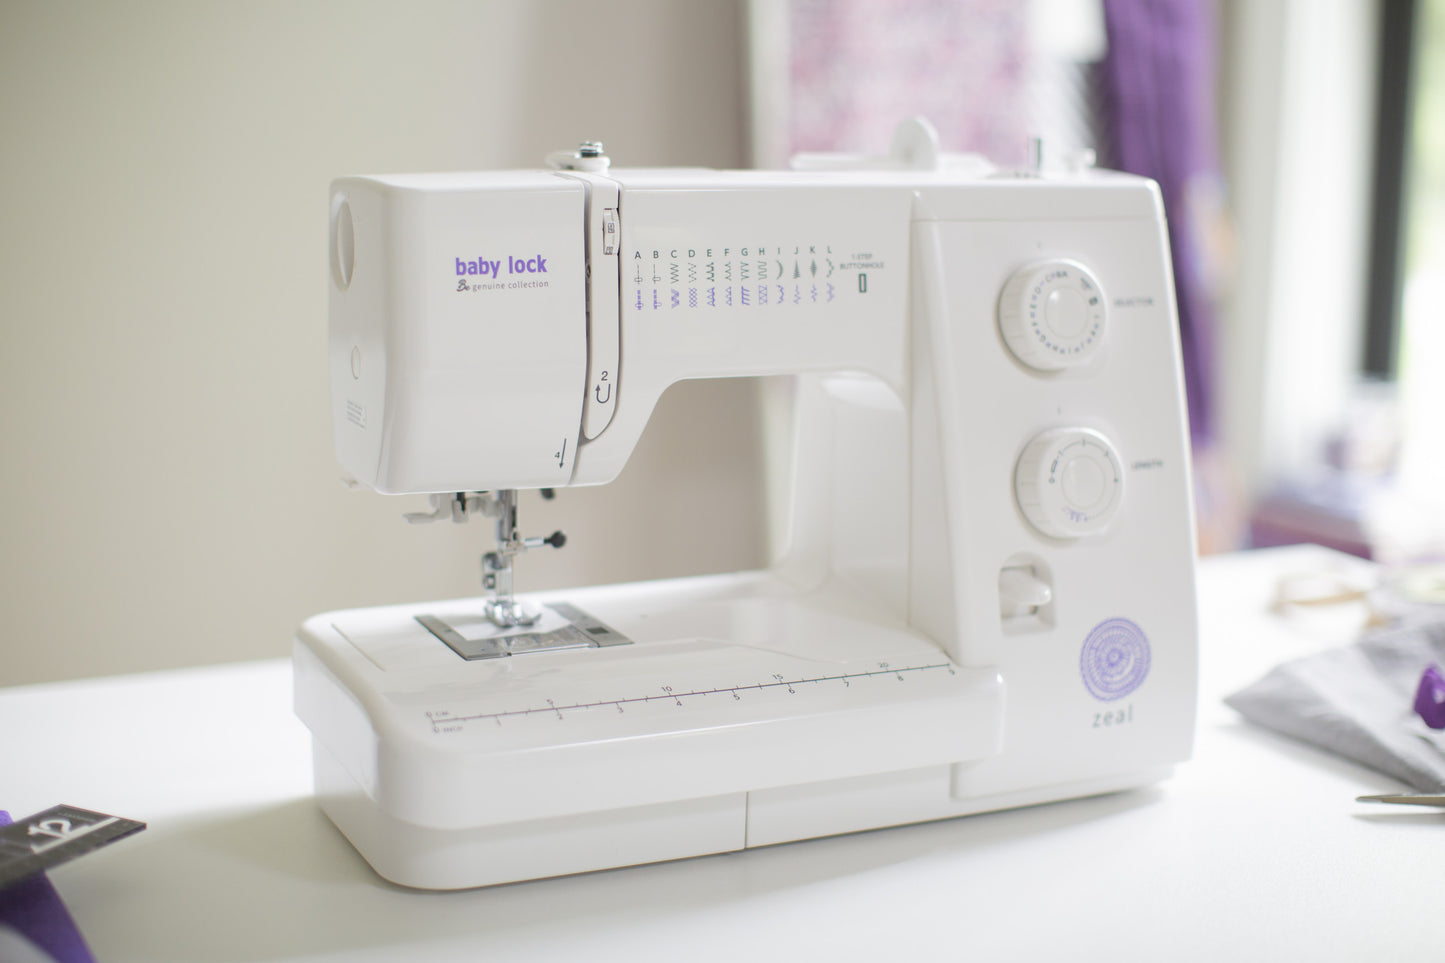 Babylock Zeal, Sewing Only machine